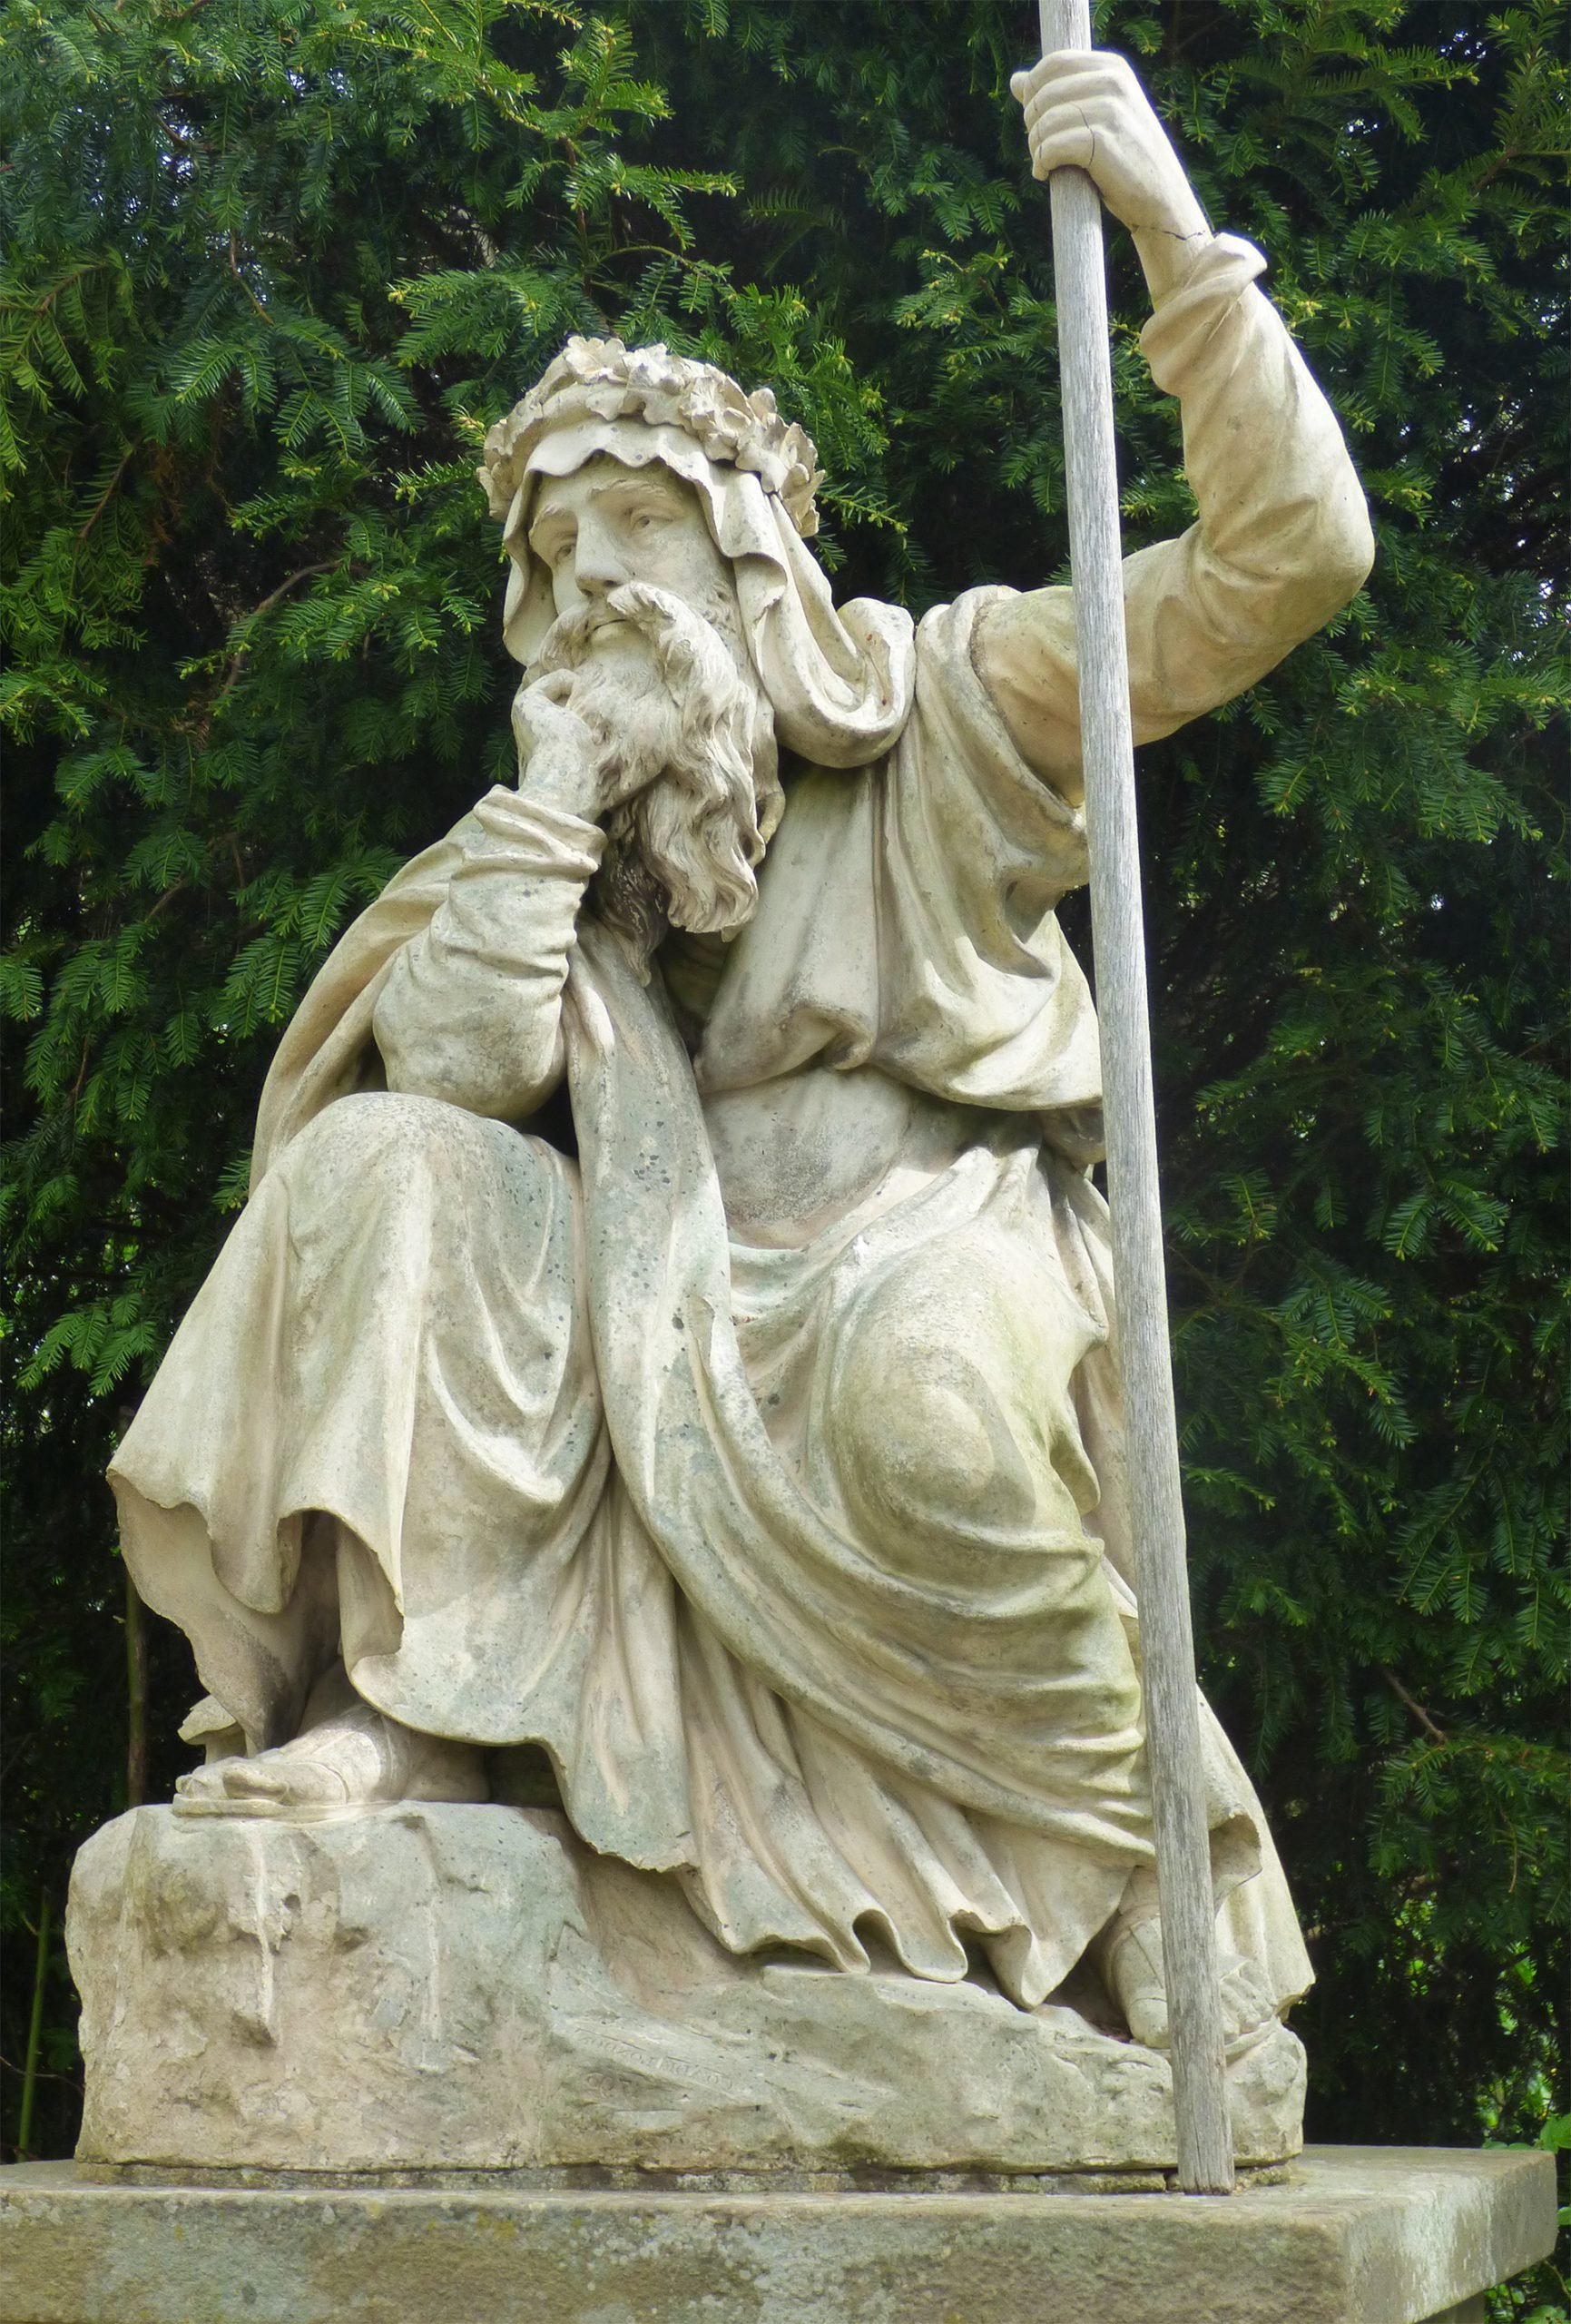 A statue of a druid situated in Croome Park, carved in detail, capturing the essence of druidic attire and posture, set against the backdrop of the park's natural landscape.